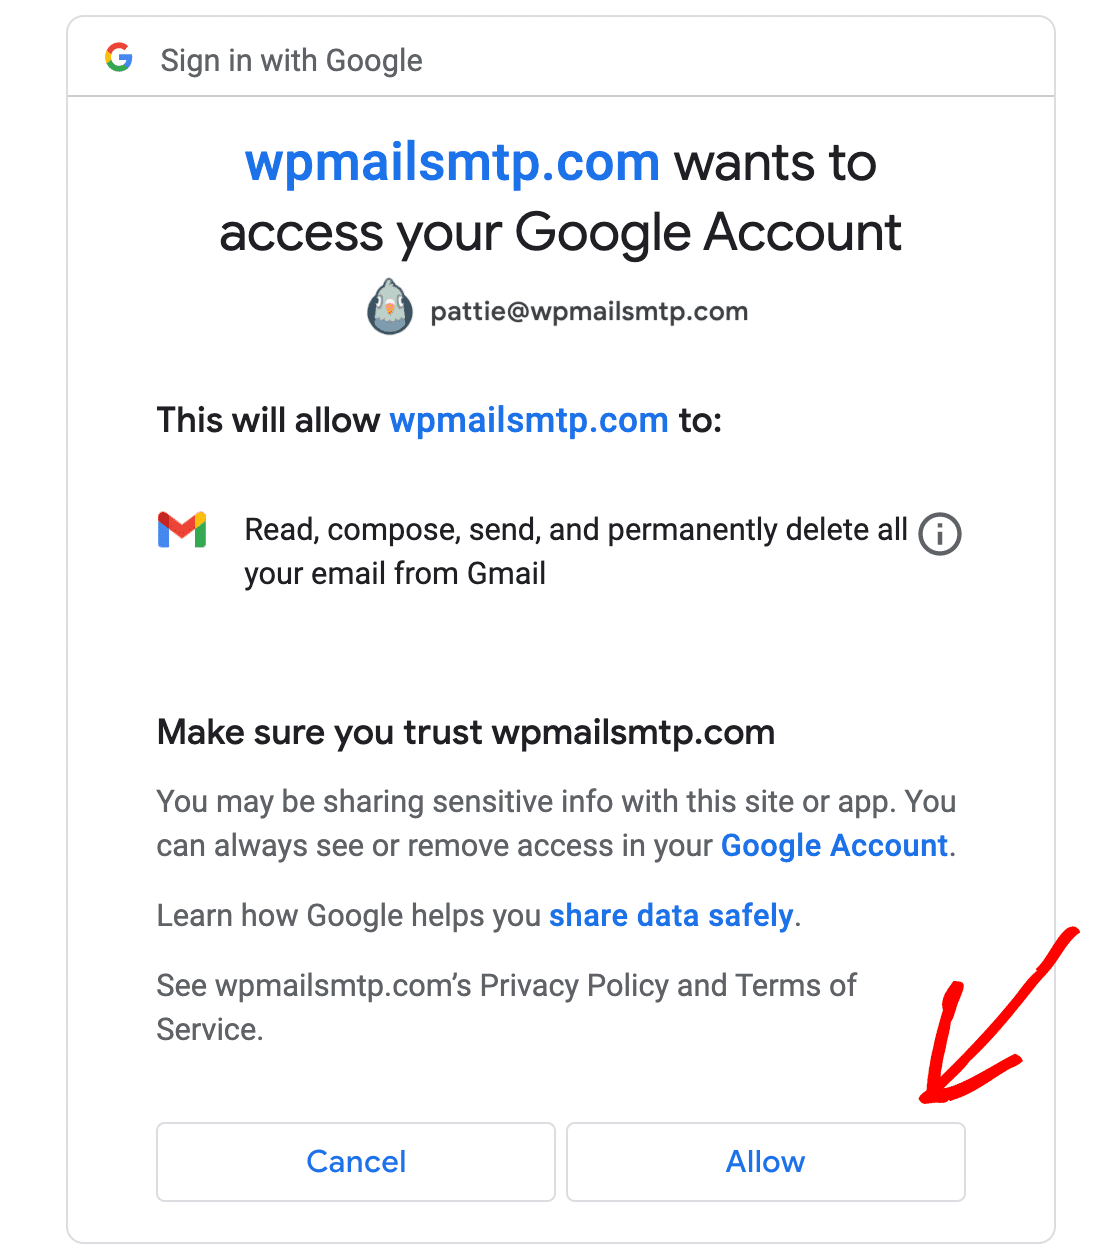 Allowing your site to send emails from your Google account